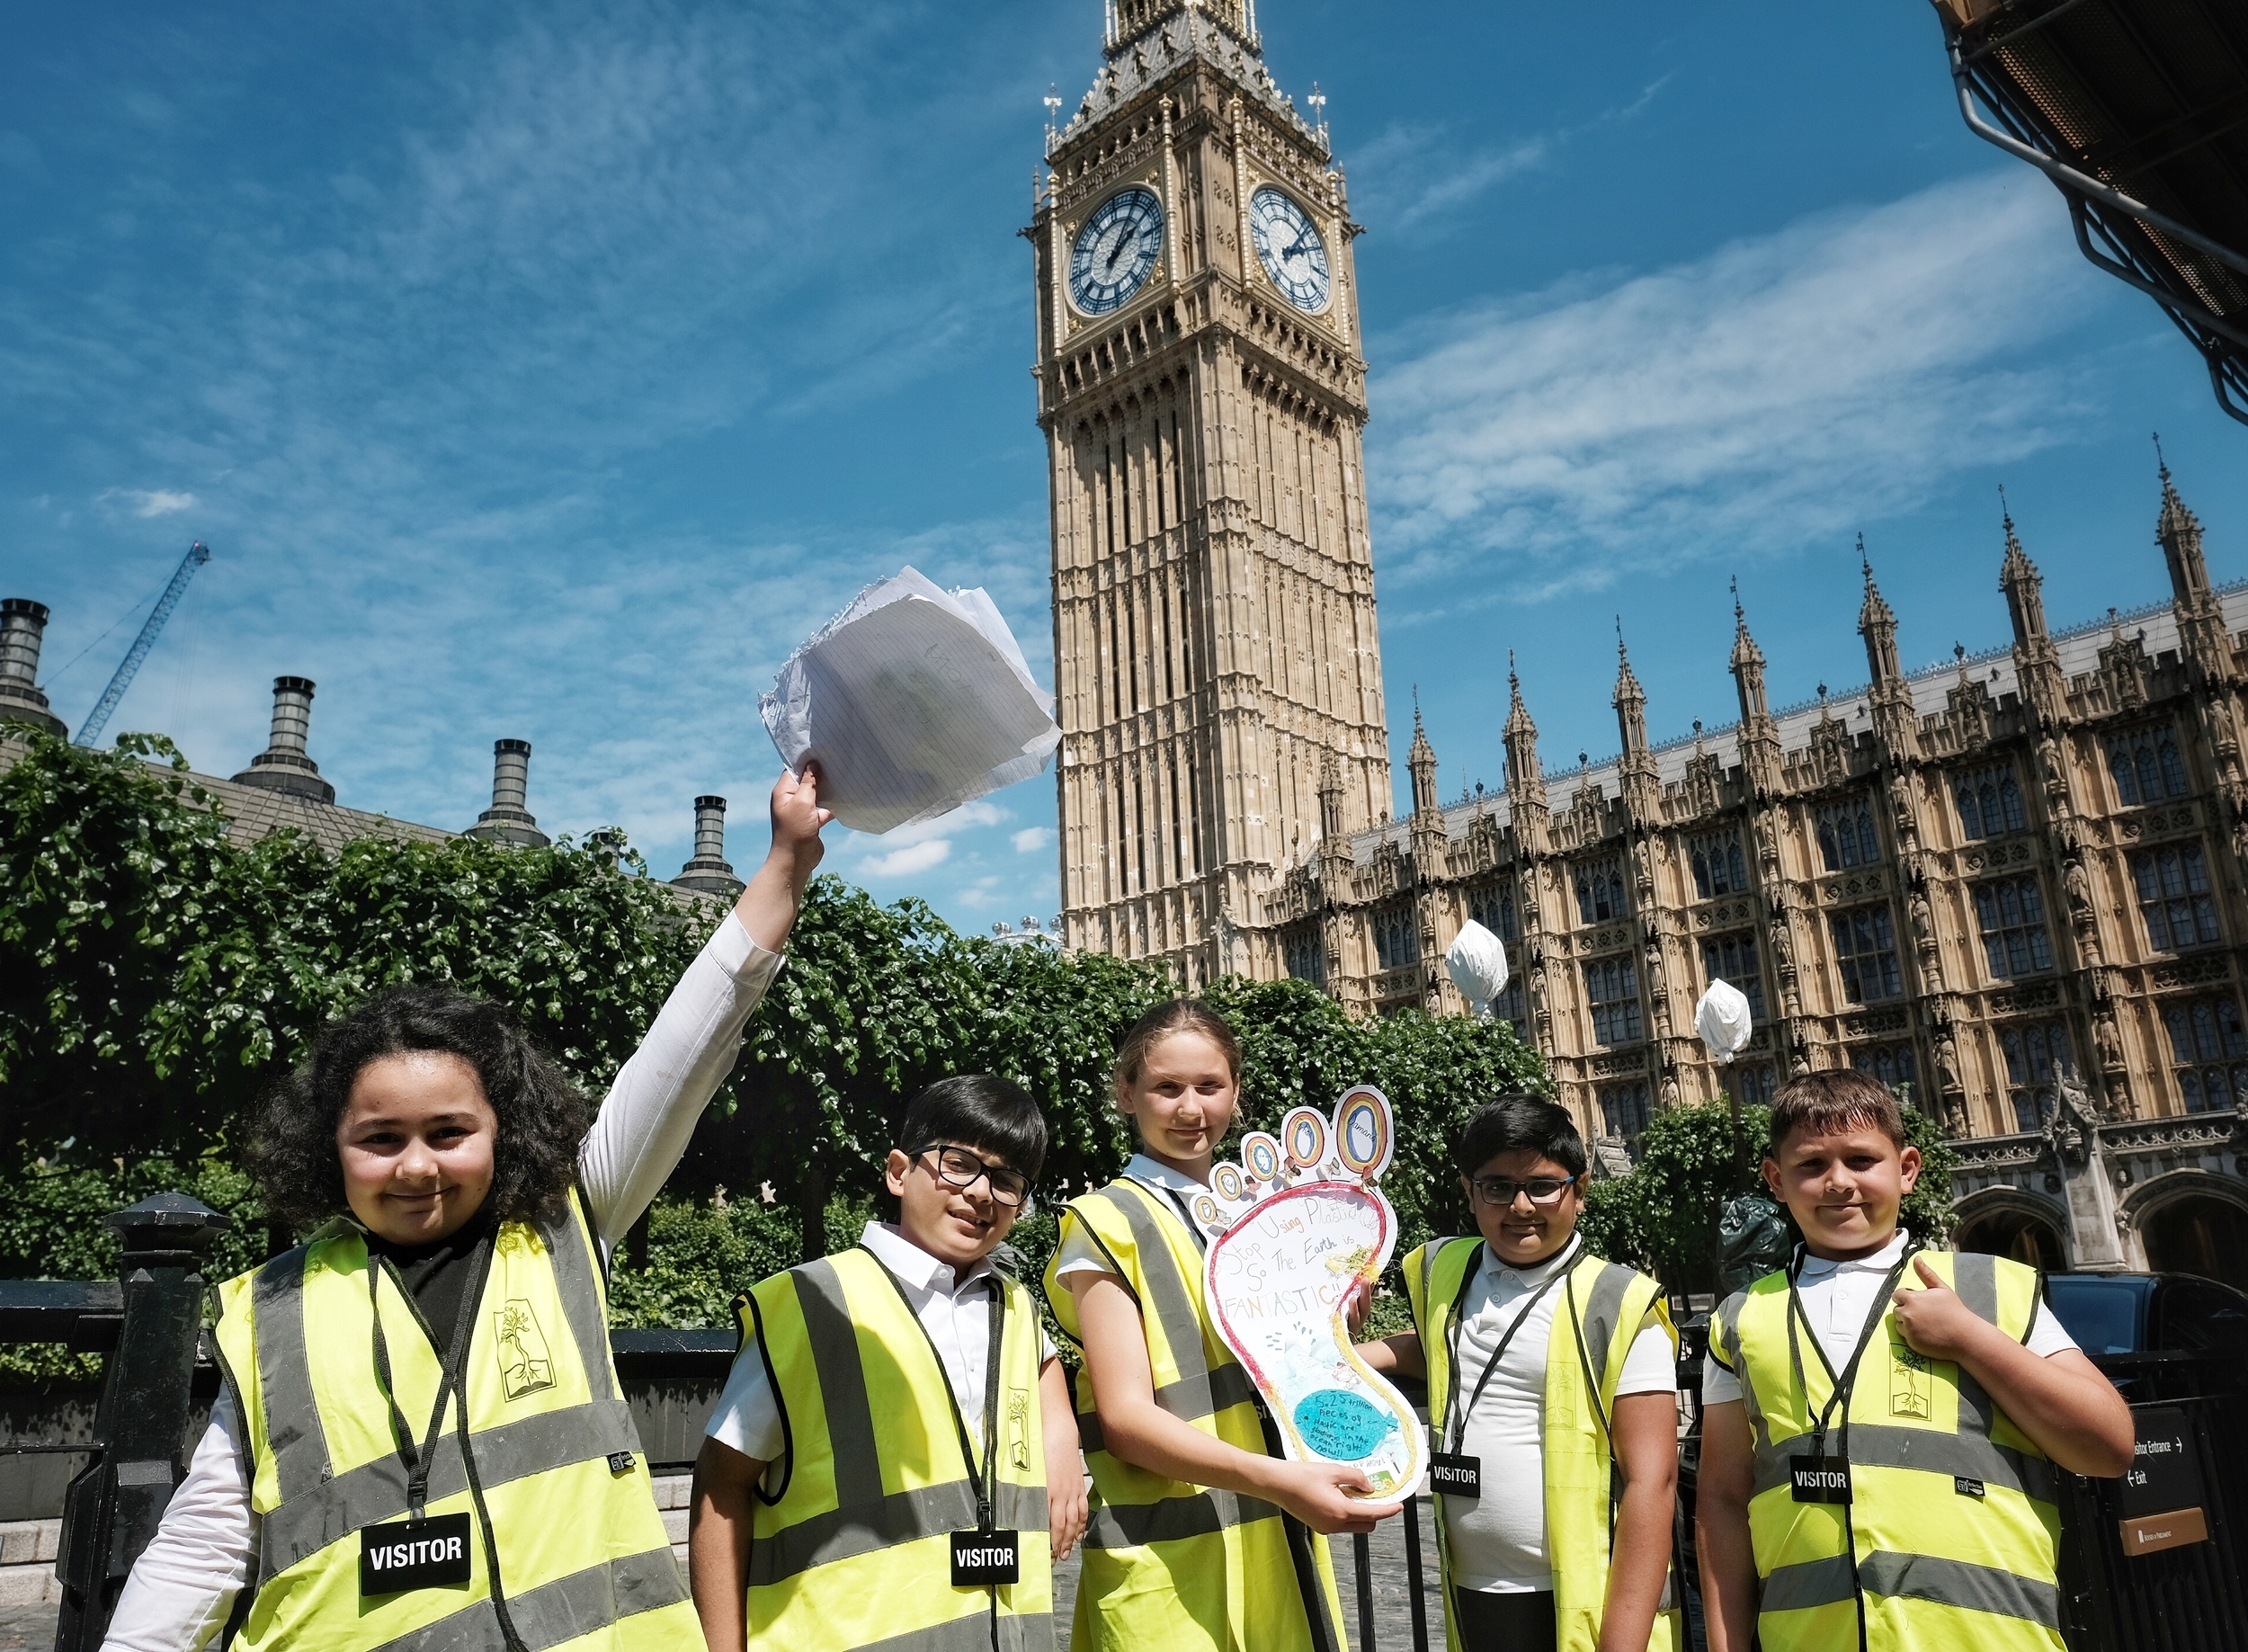 In front of a blue sky and Big Ben, five schoolchildren stand in yellow high viz jackets and 'visitor' lanyards stand. One is holding up pieces of lined paper high with her hand, another is holding a foot shape with children's writing on it